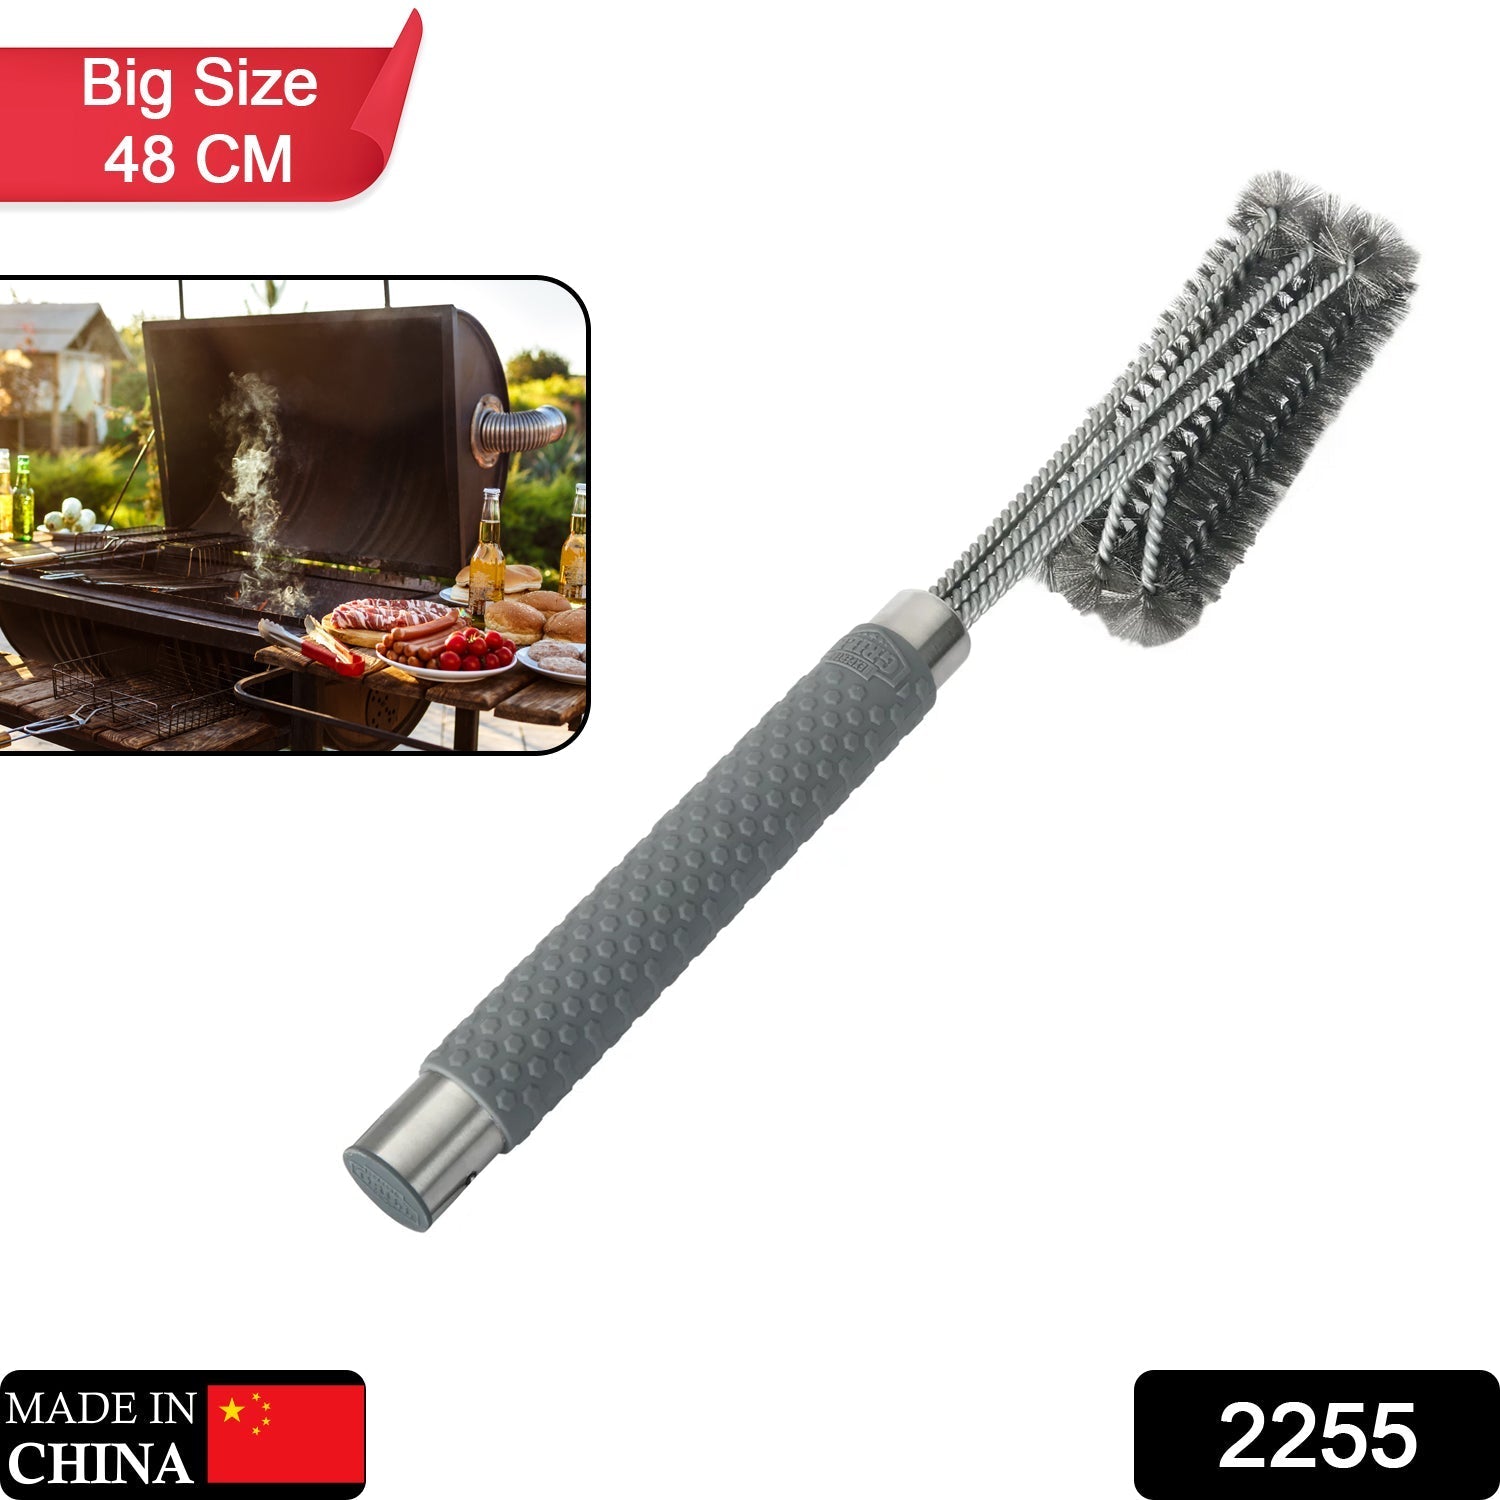 2255 3-head Grill Brush with Stainless Steel Bristles and Soft-Grip Handle DeoDap